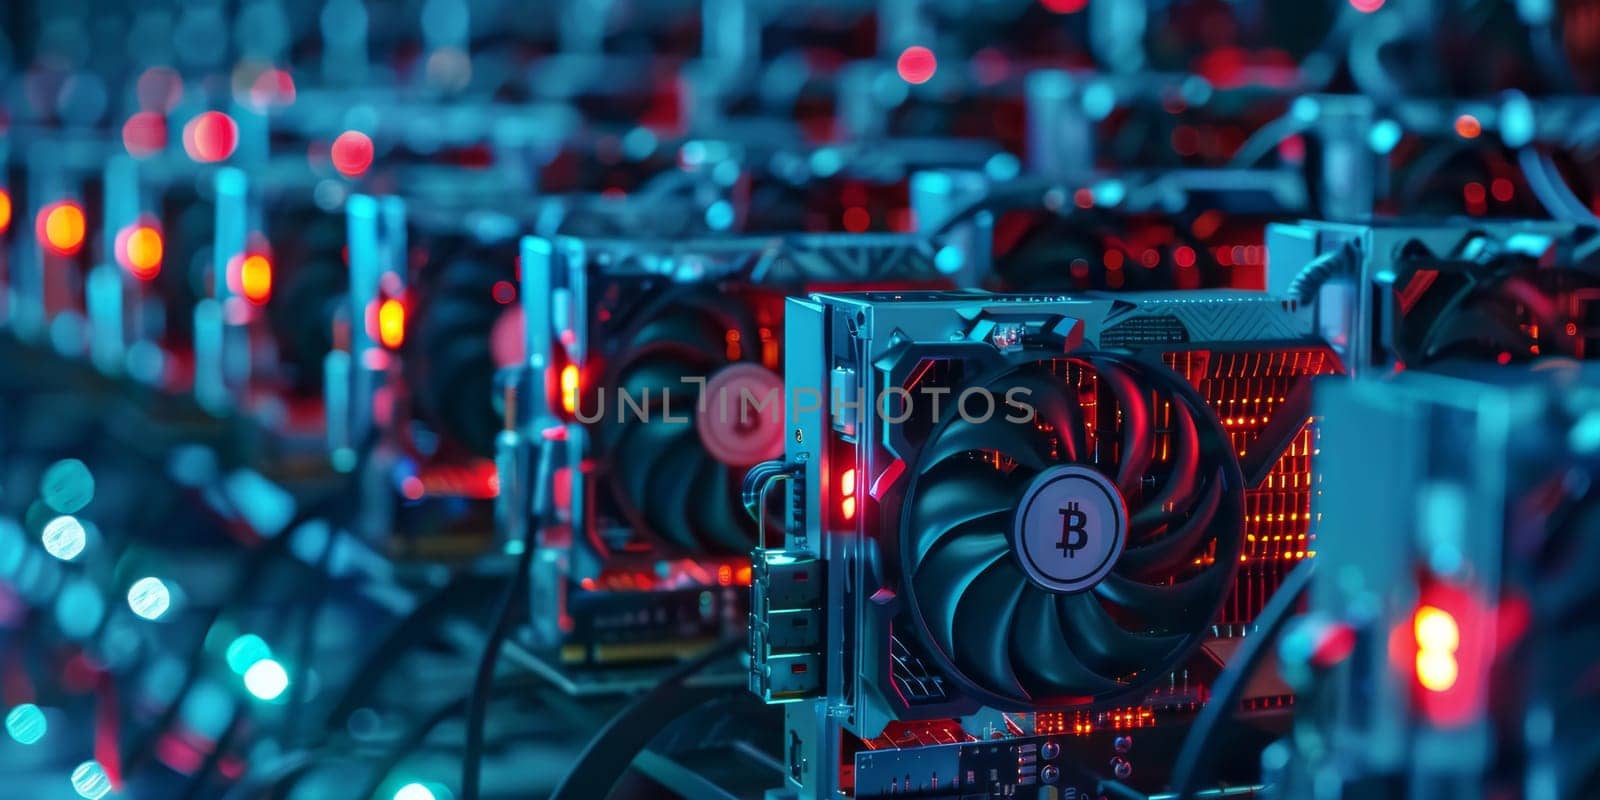 Array of computer CPUs illuminated by red and blue lights, a bitcoin miners